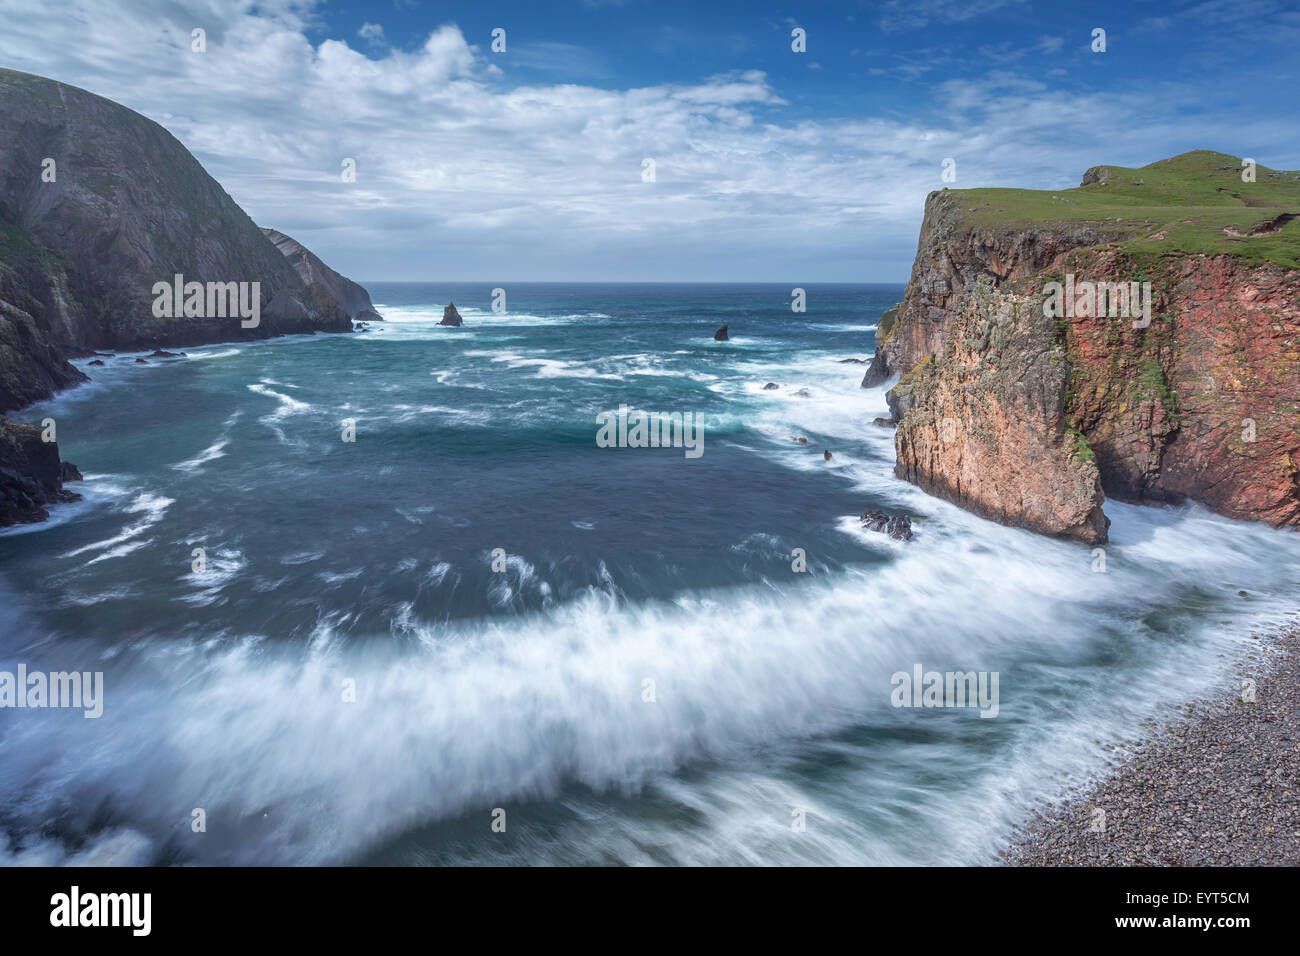 Bay on the south west coast of Fair isle, an island in the Atlantic ocean  between  Orkney and Shetland. Stock Photo